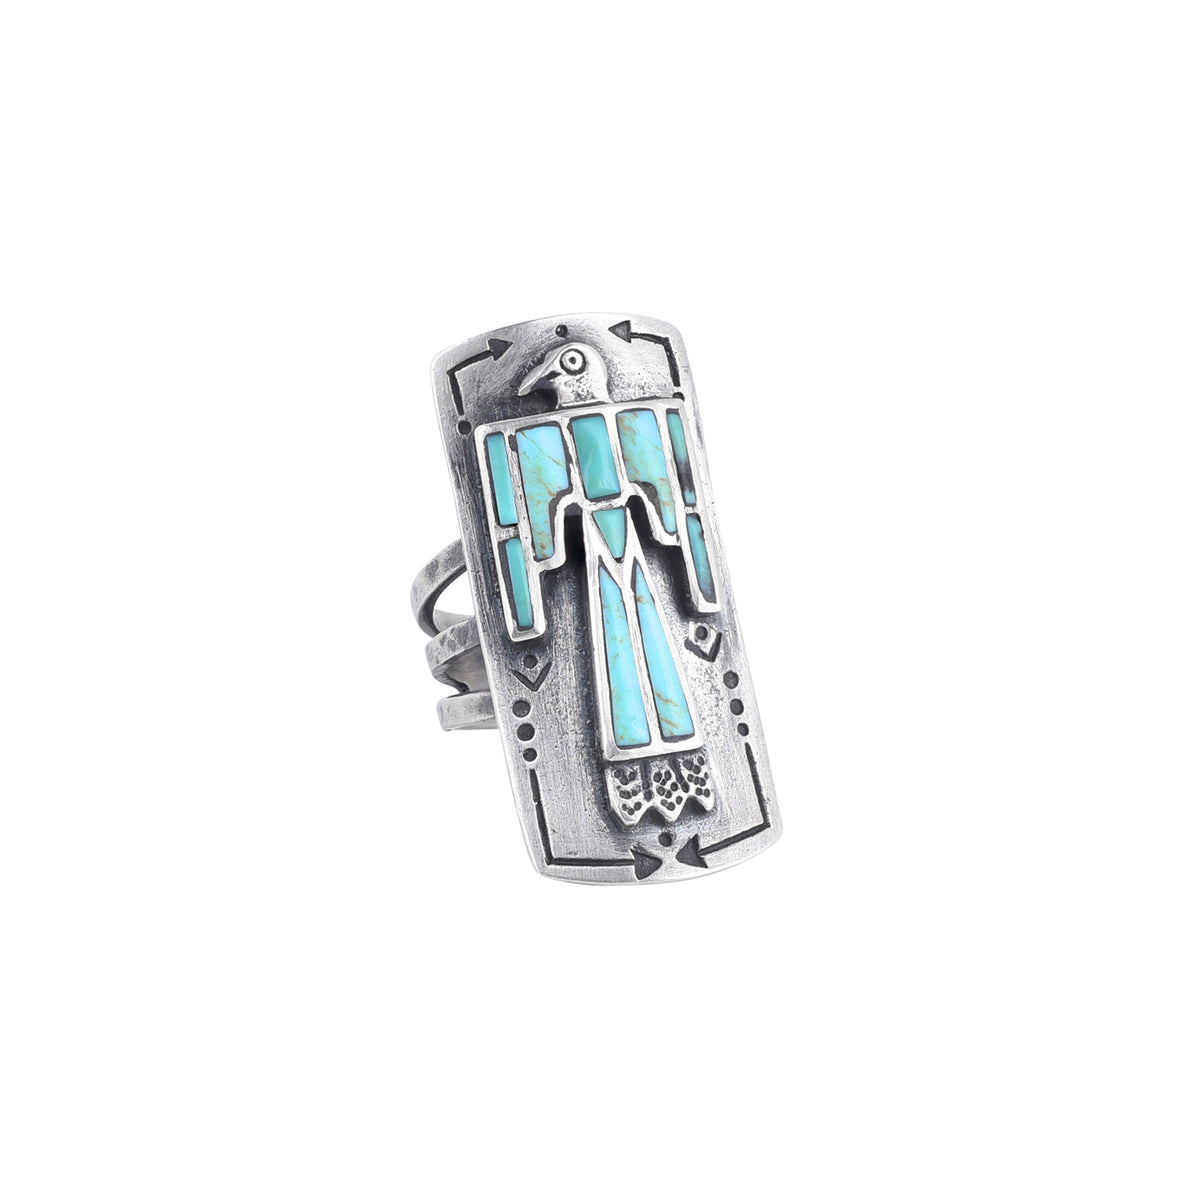 Thunderbird Ring in Turquoise | COWGIRL Heirloom by Peyote Bird